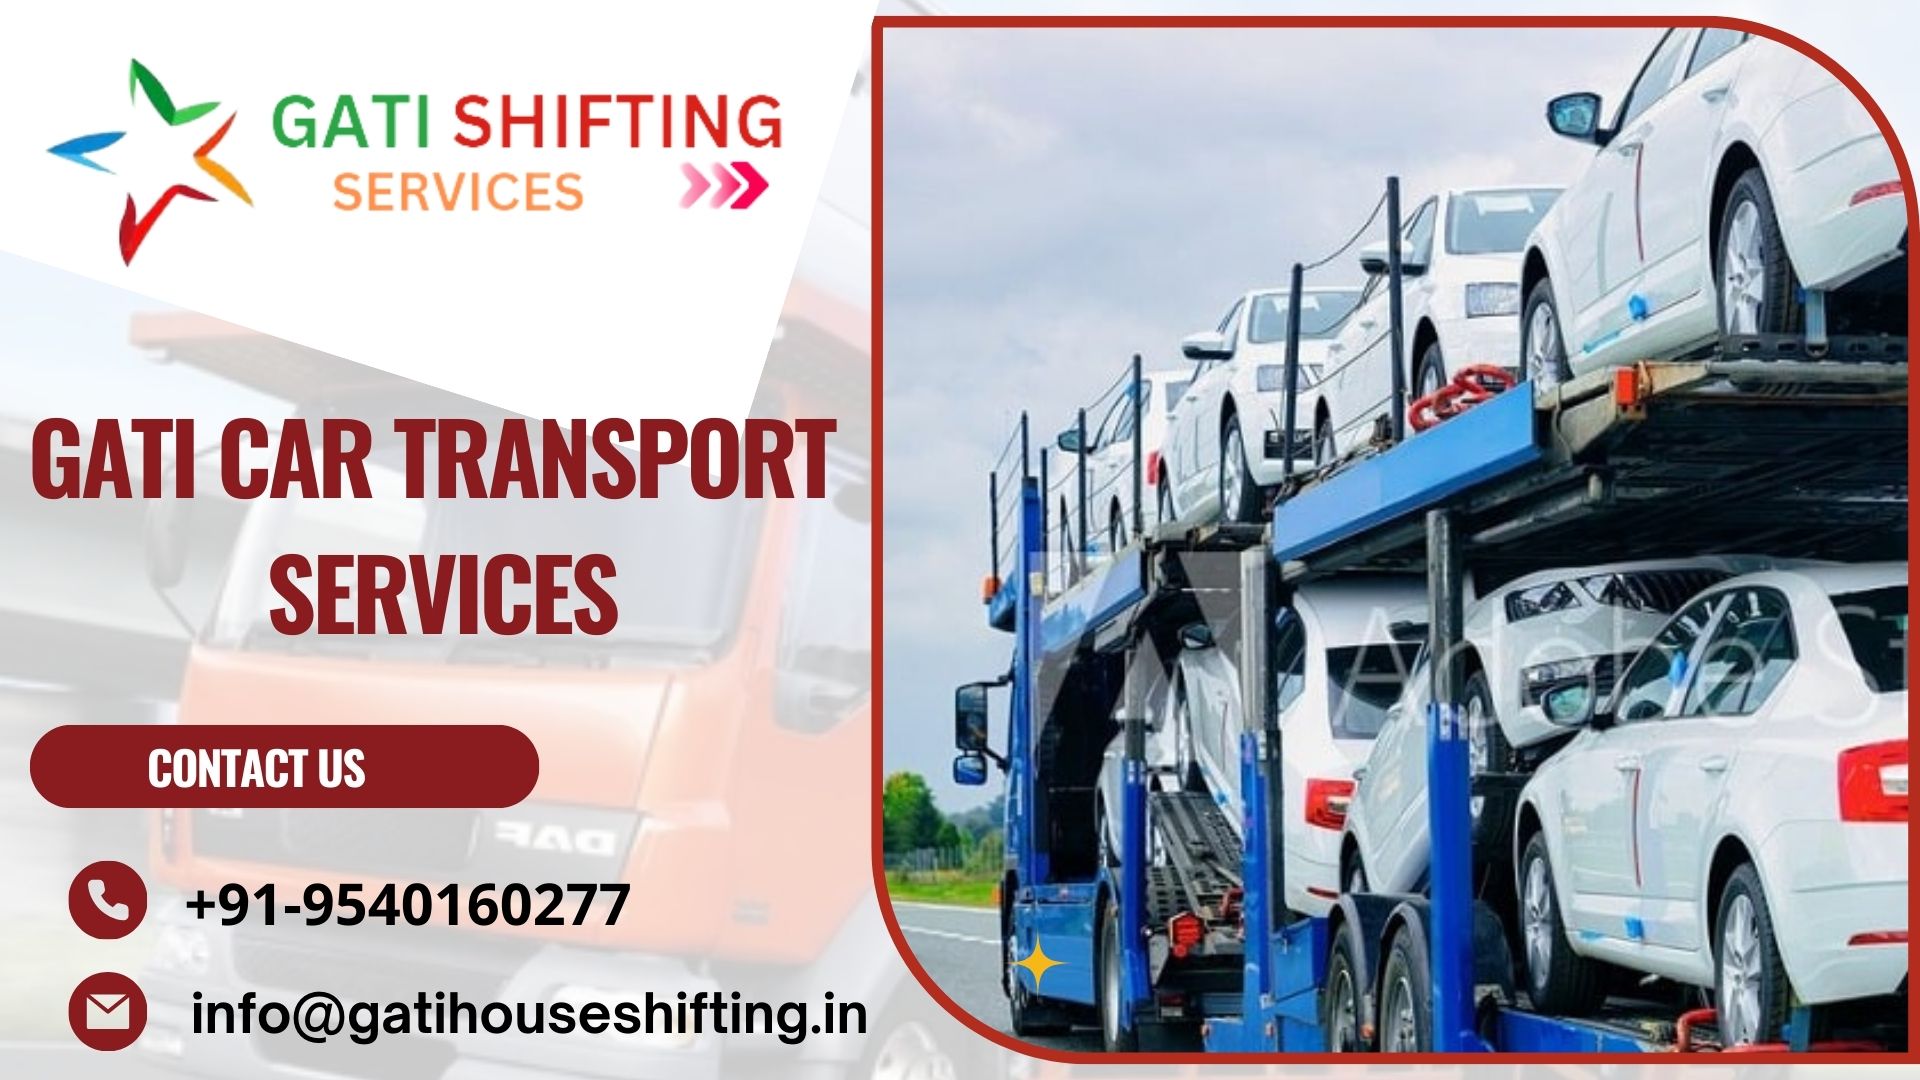 Car transport services in Chandigarh